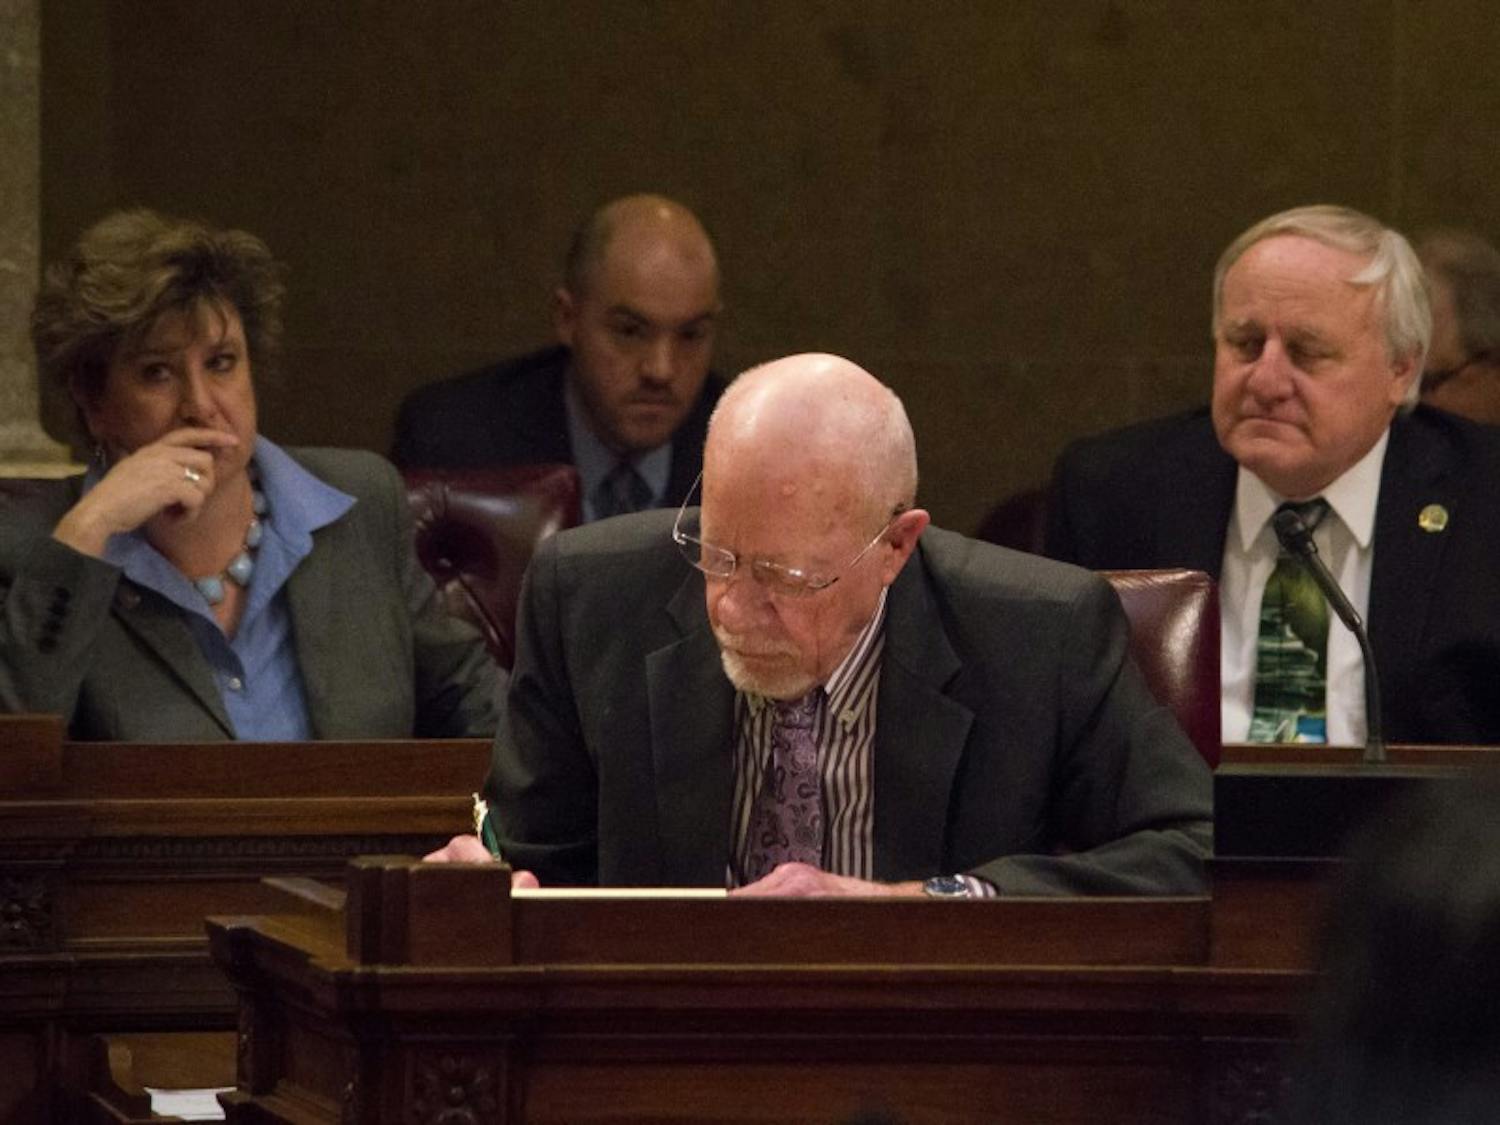 The state Senate approved scores of bills, including a college affordability package, in its last floor period of the session Tuesday.